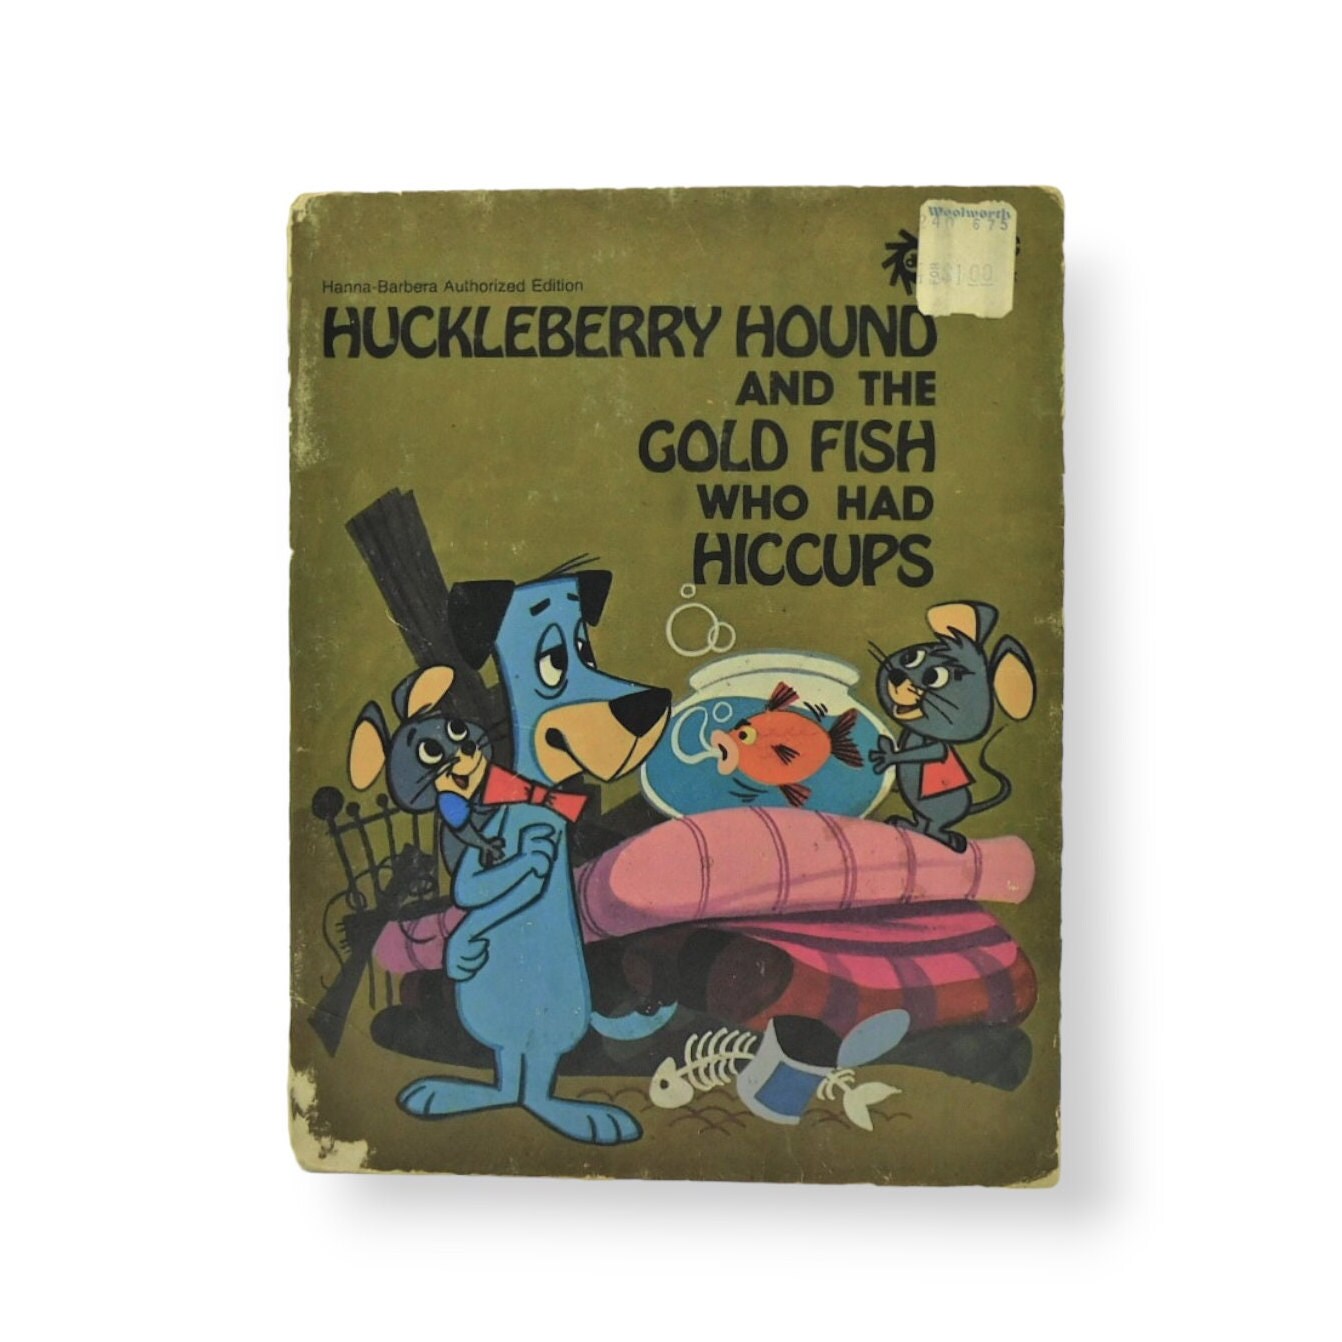 Huckleberry Hound And The Gold Fish Who Had Hiccups by Horace J. Elias 1974 (Durabook)